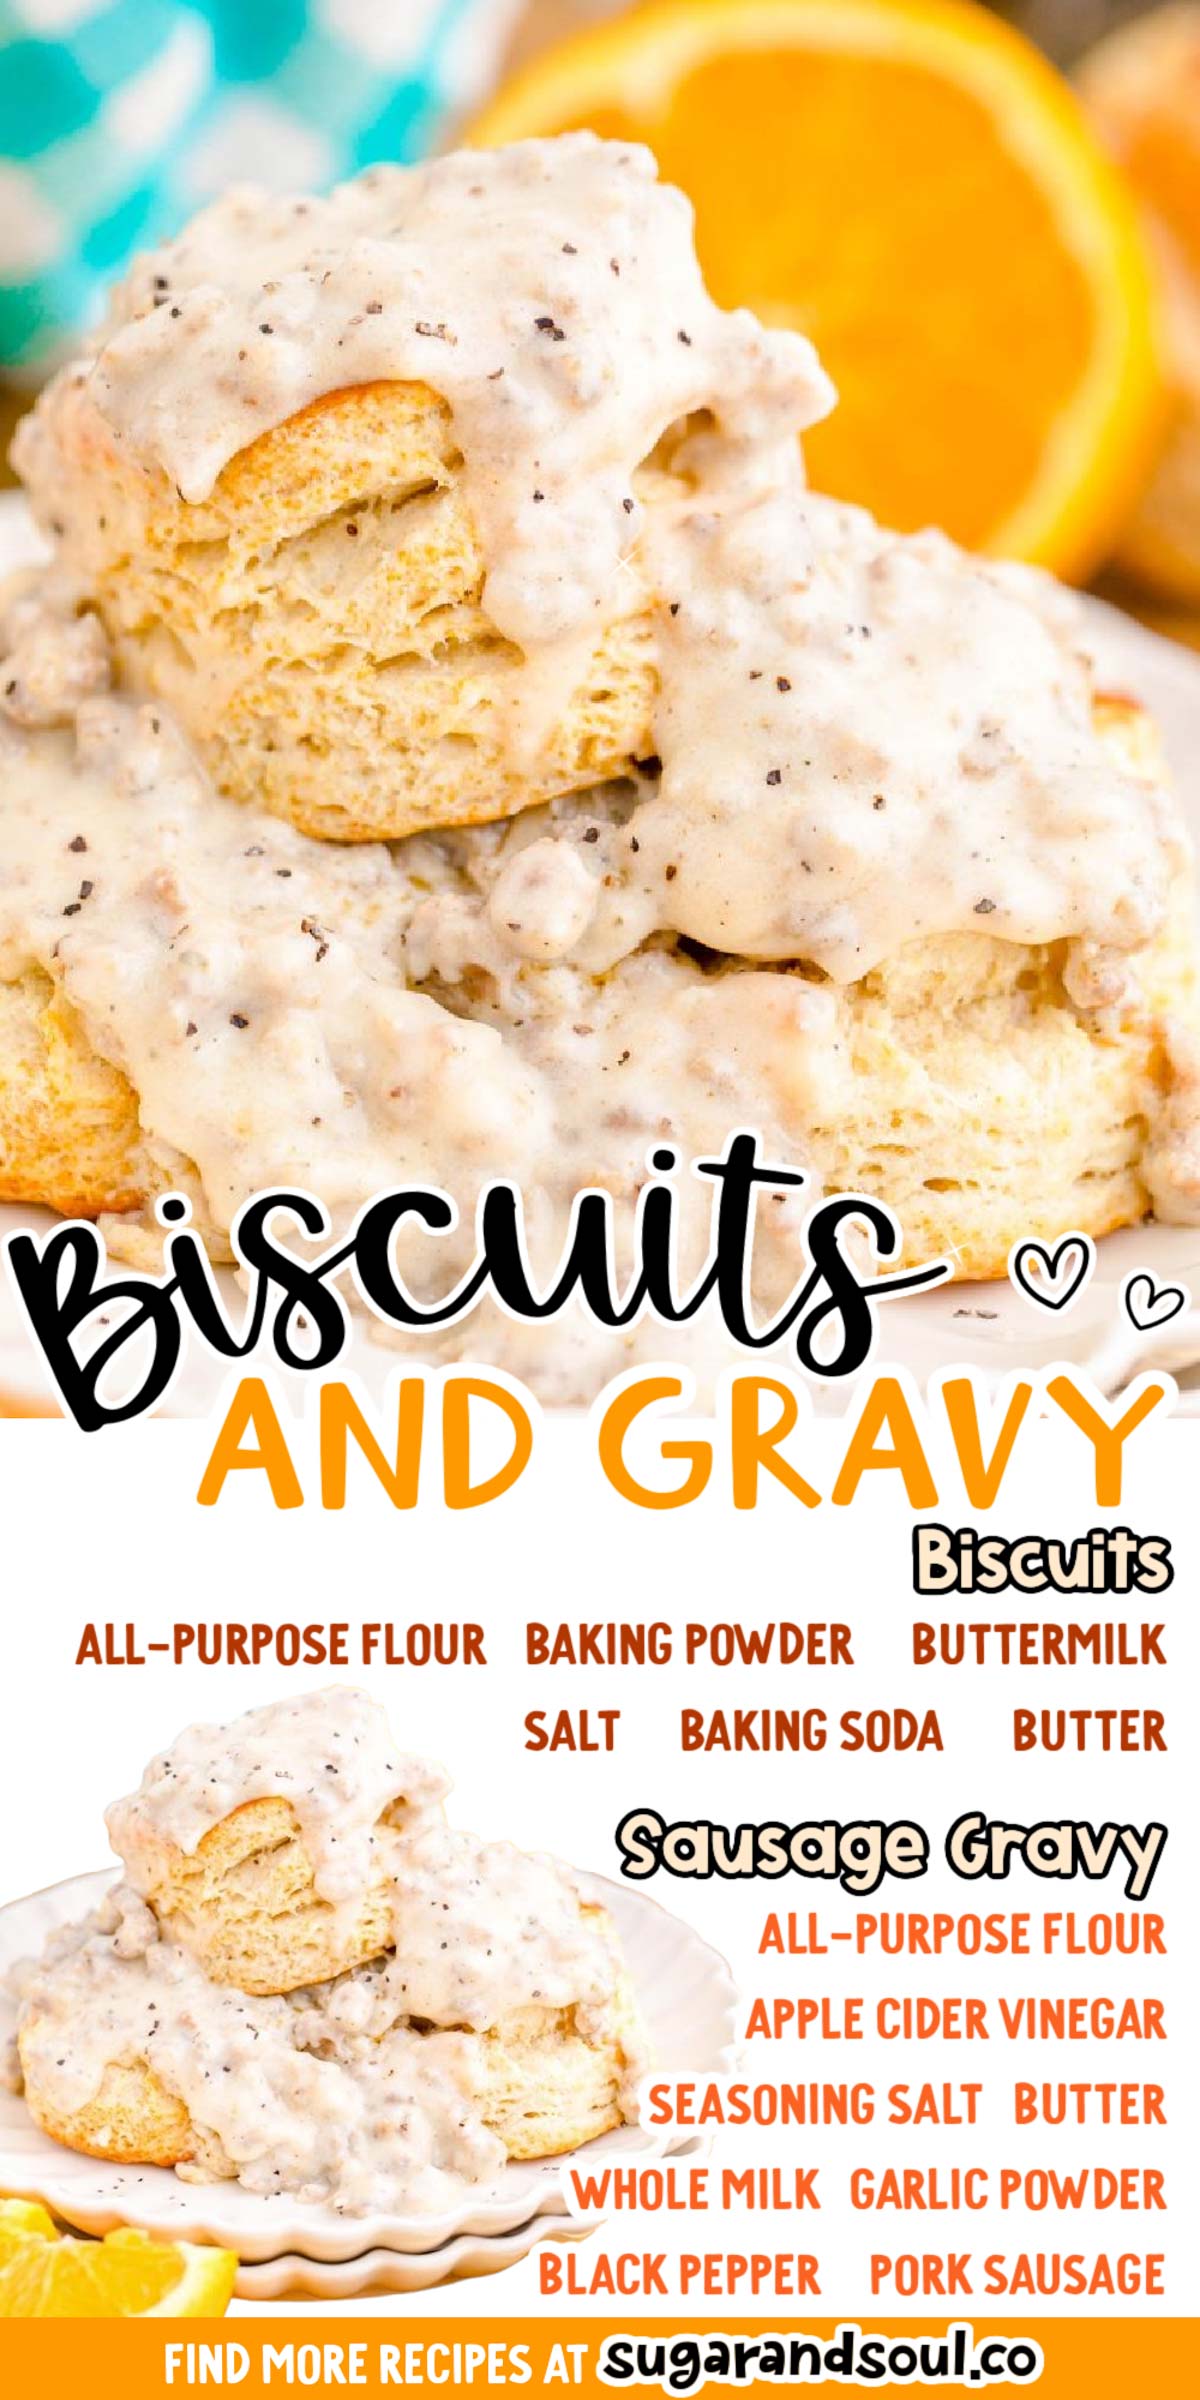 This Biscuits and Sausage Gravy covers homemade buttermilk biscuits with a hearty sausage gravy that's made with ground pork and whole milk! An easy recipe that cooks up in just 15 minutes! via @sugarandsoulco